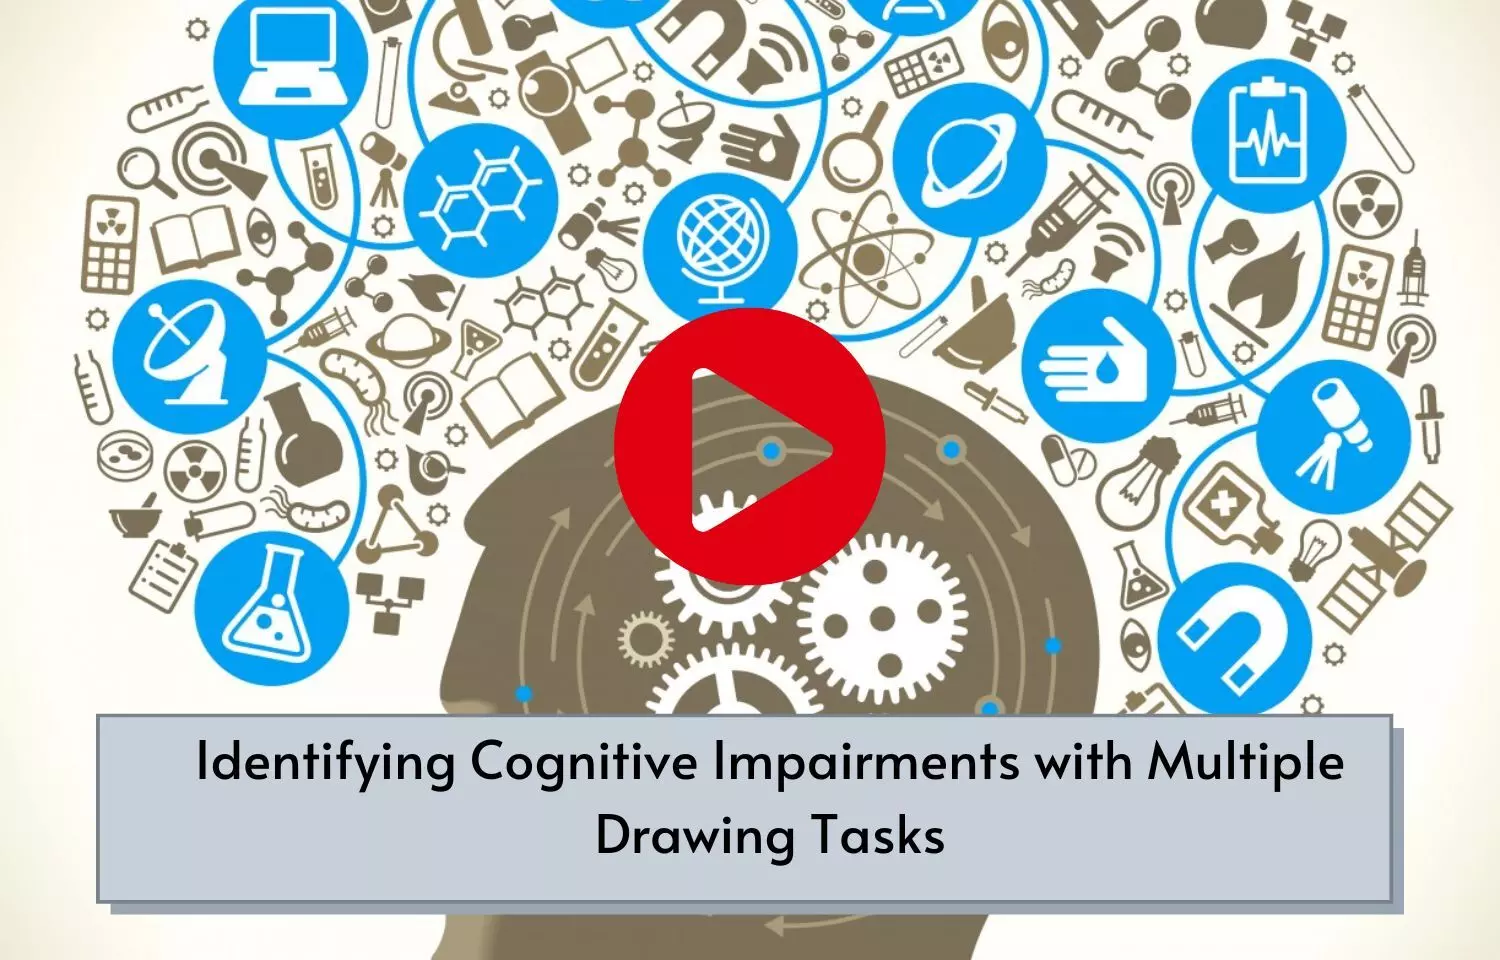 Identifying Cognitive Impairments with Multiple Drawing Tasks